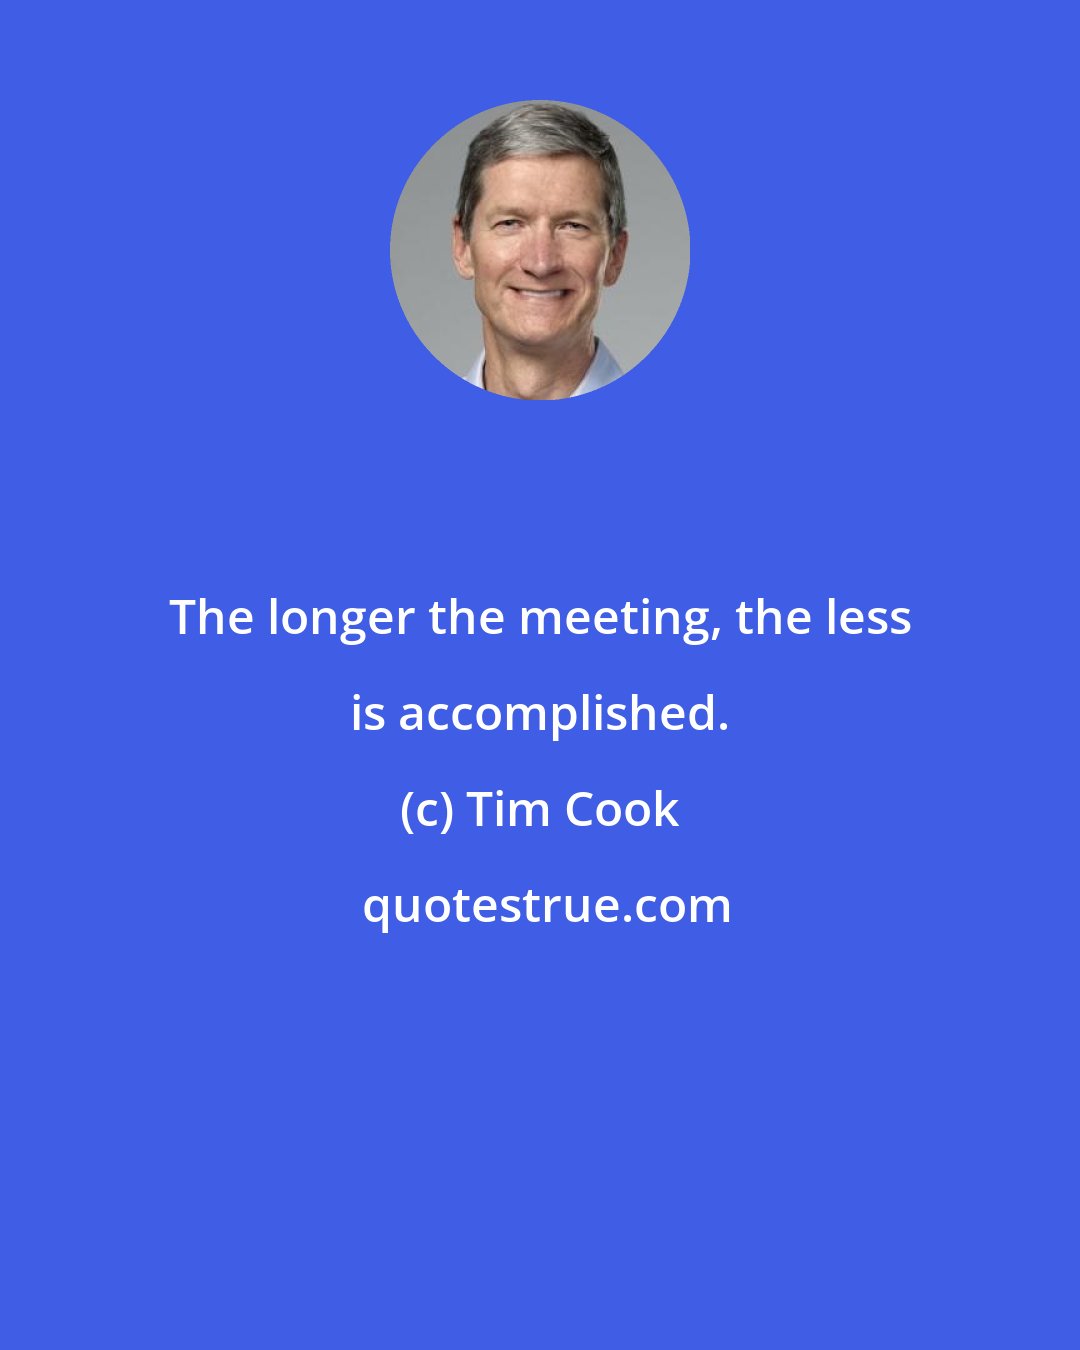 Tim Cook: The longer the meeting, the less is accomplished.